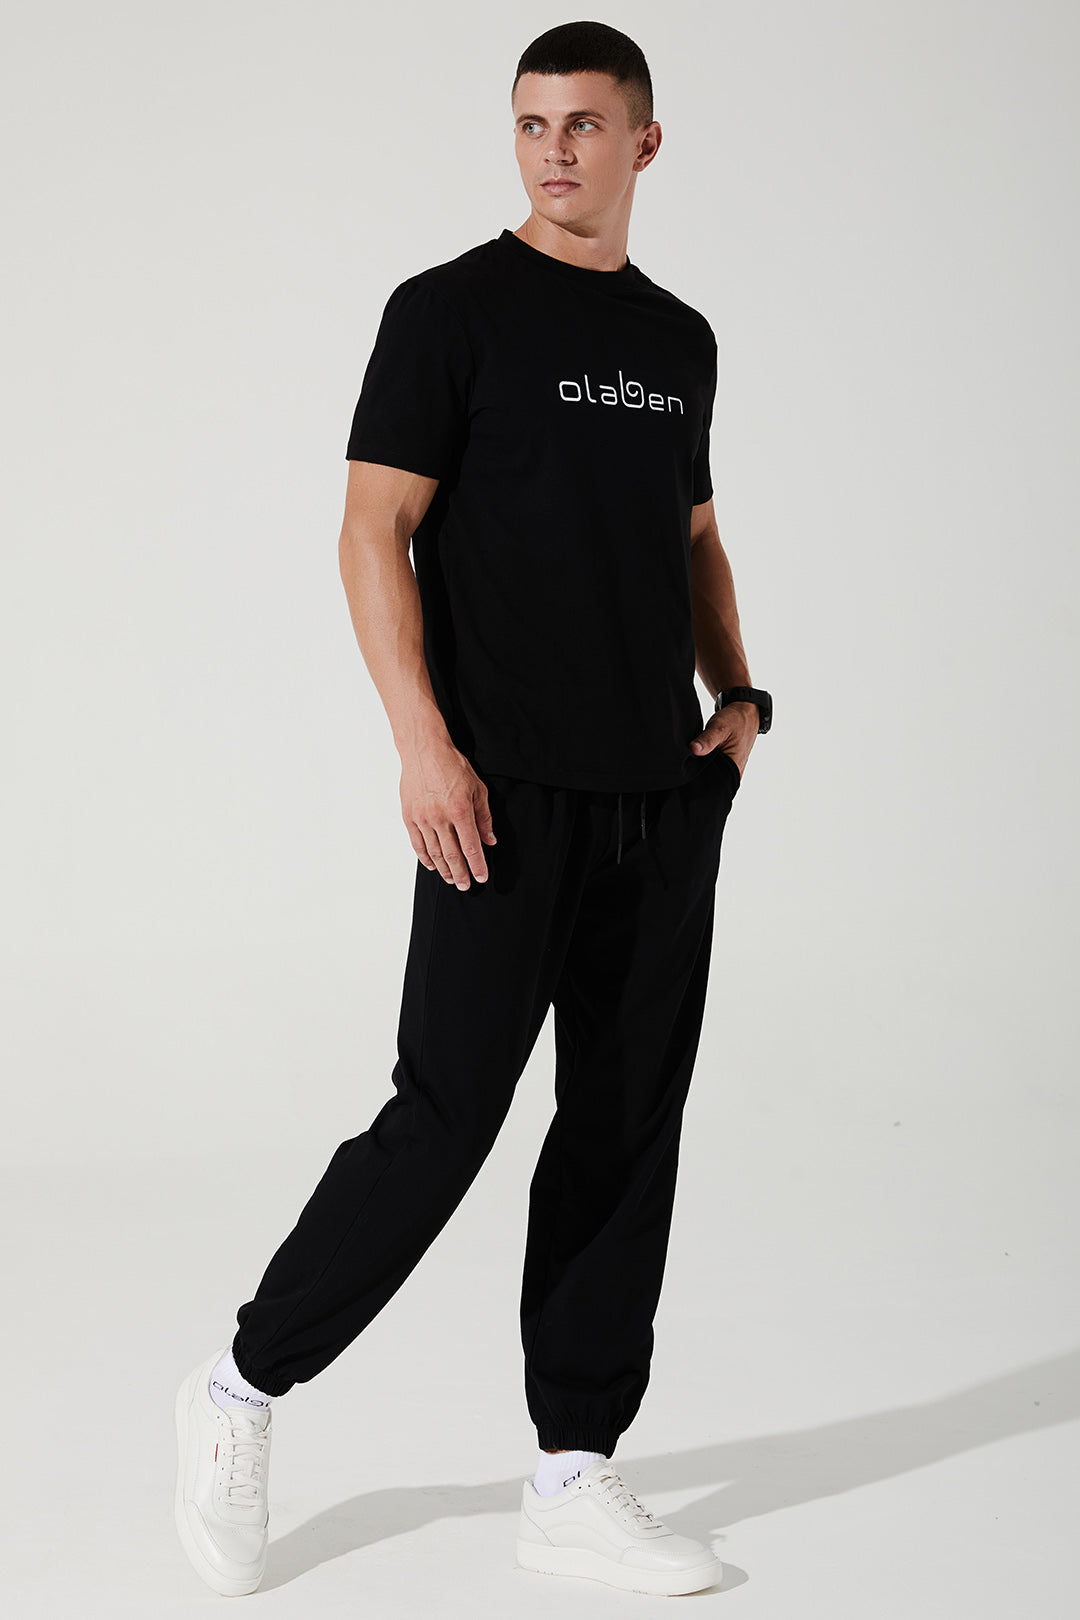 Black men's sweatpants and trousers for Janet, style OW-0034-MTR-BK, in size 4.